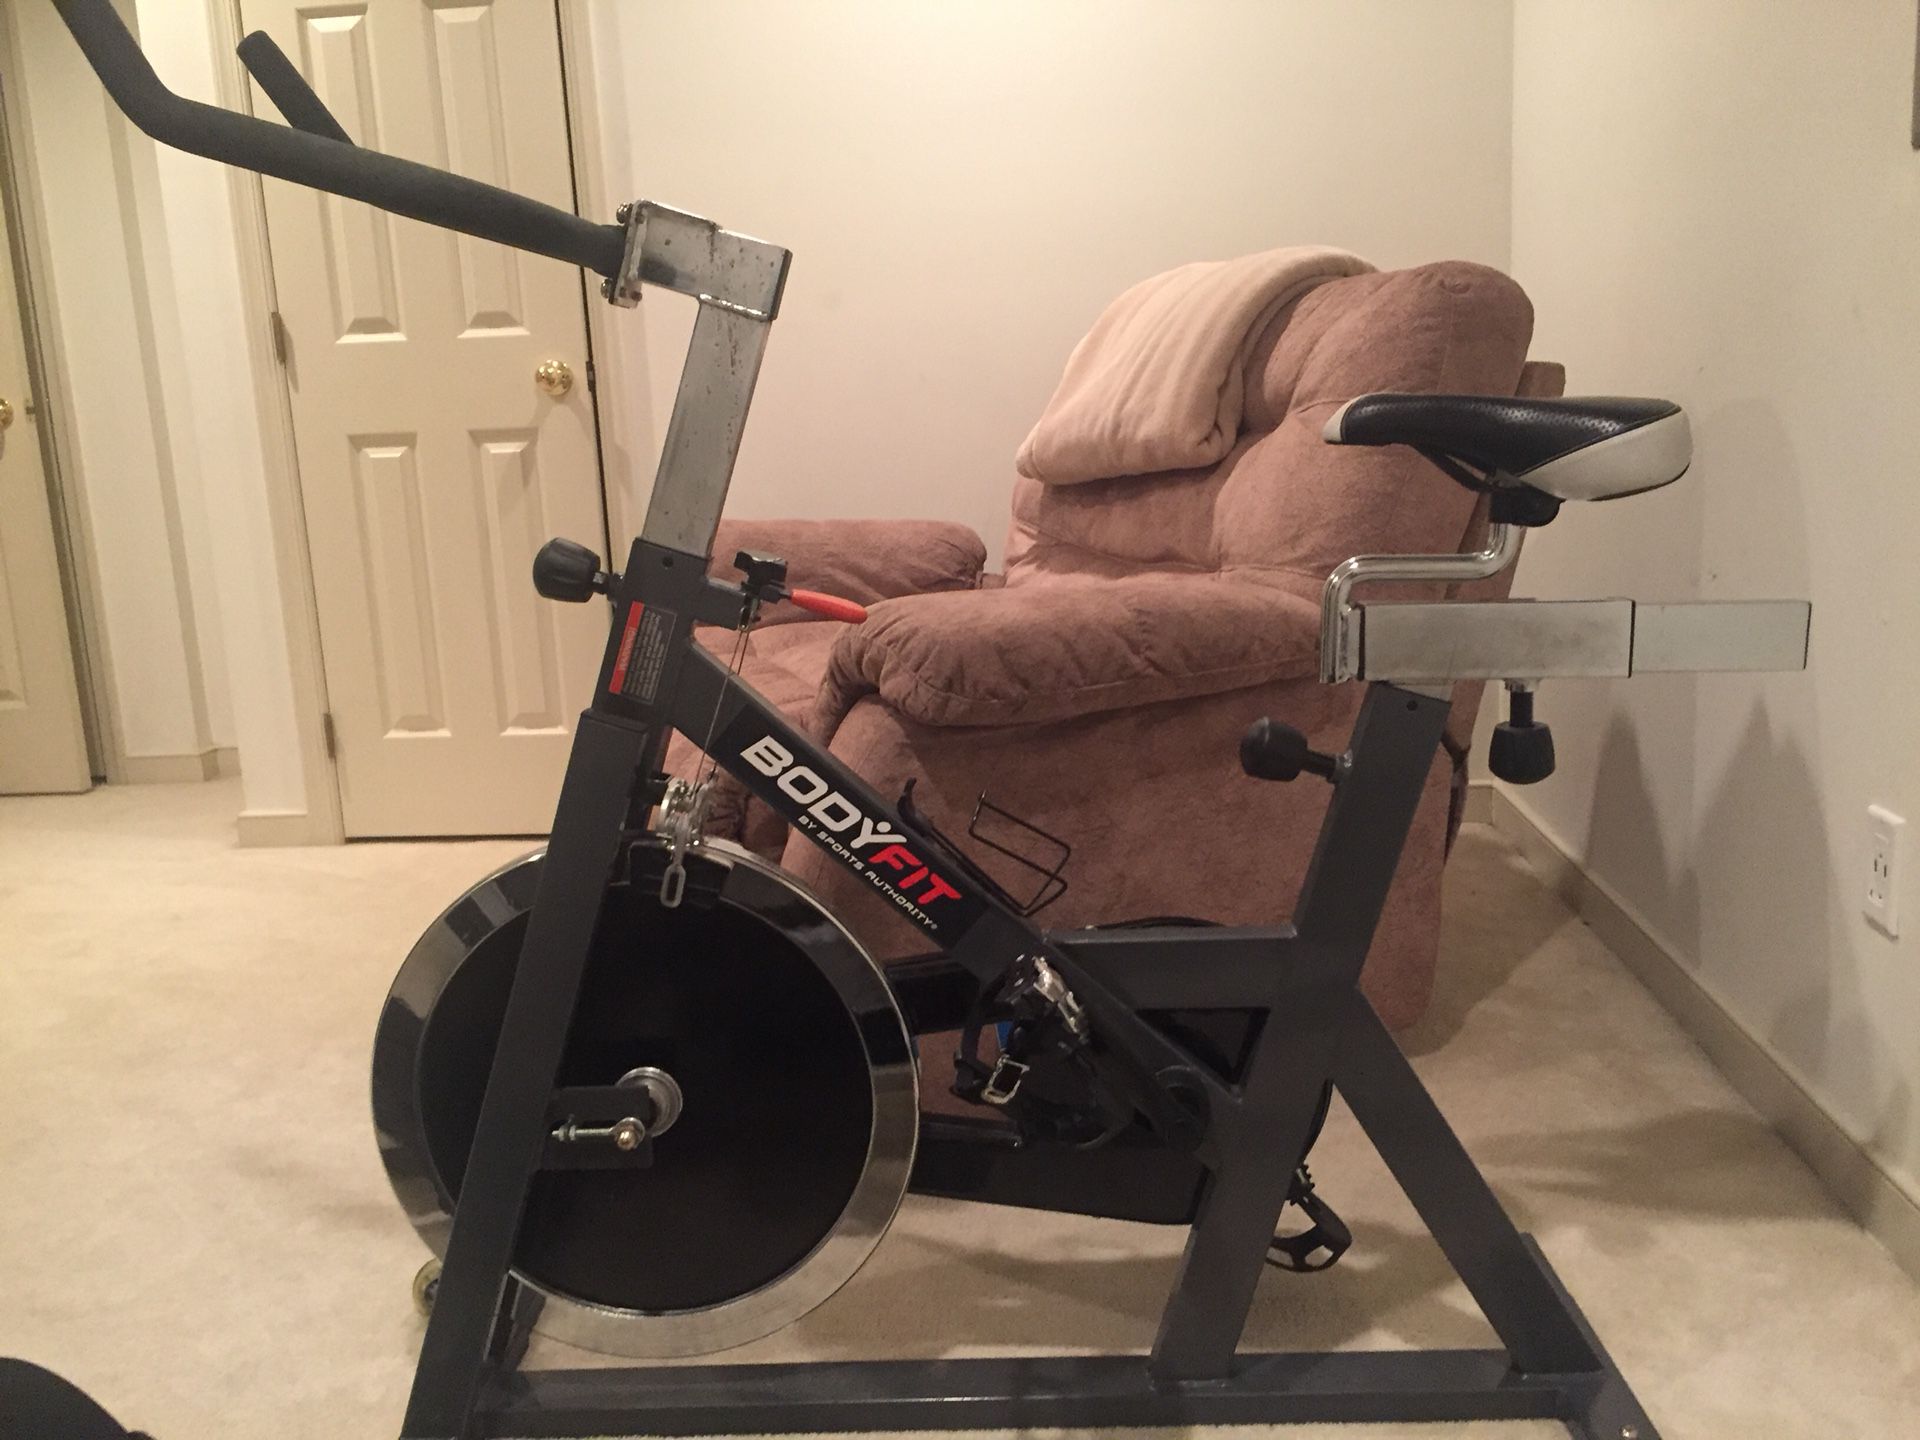 Bodyfit exercise bike by sports authority